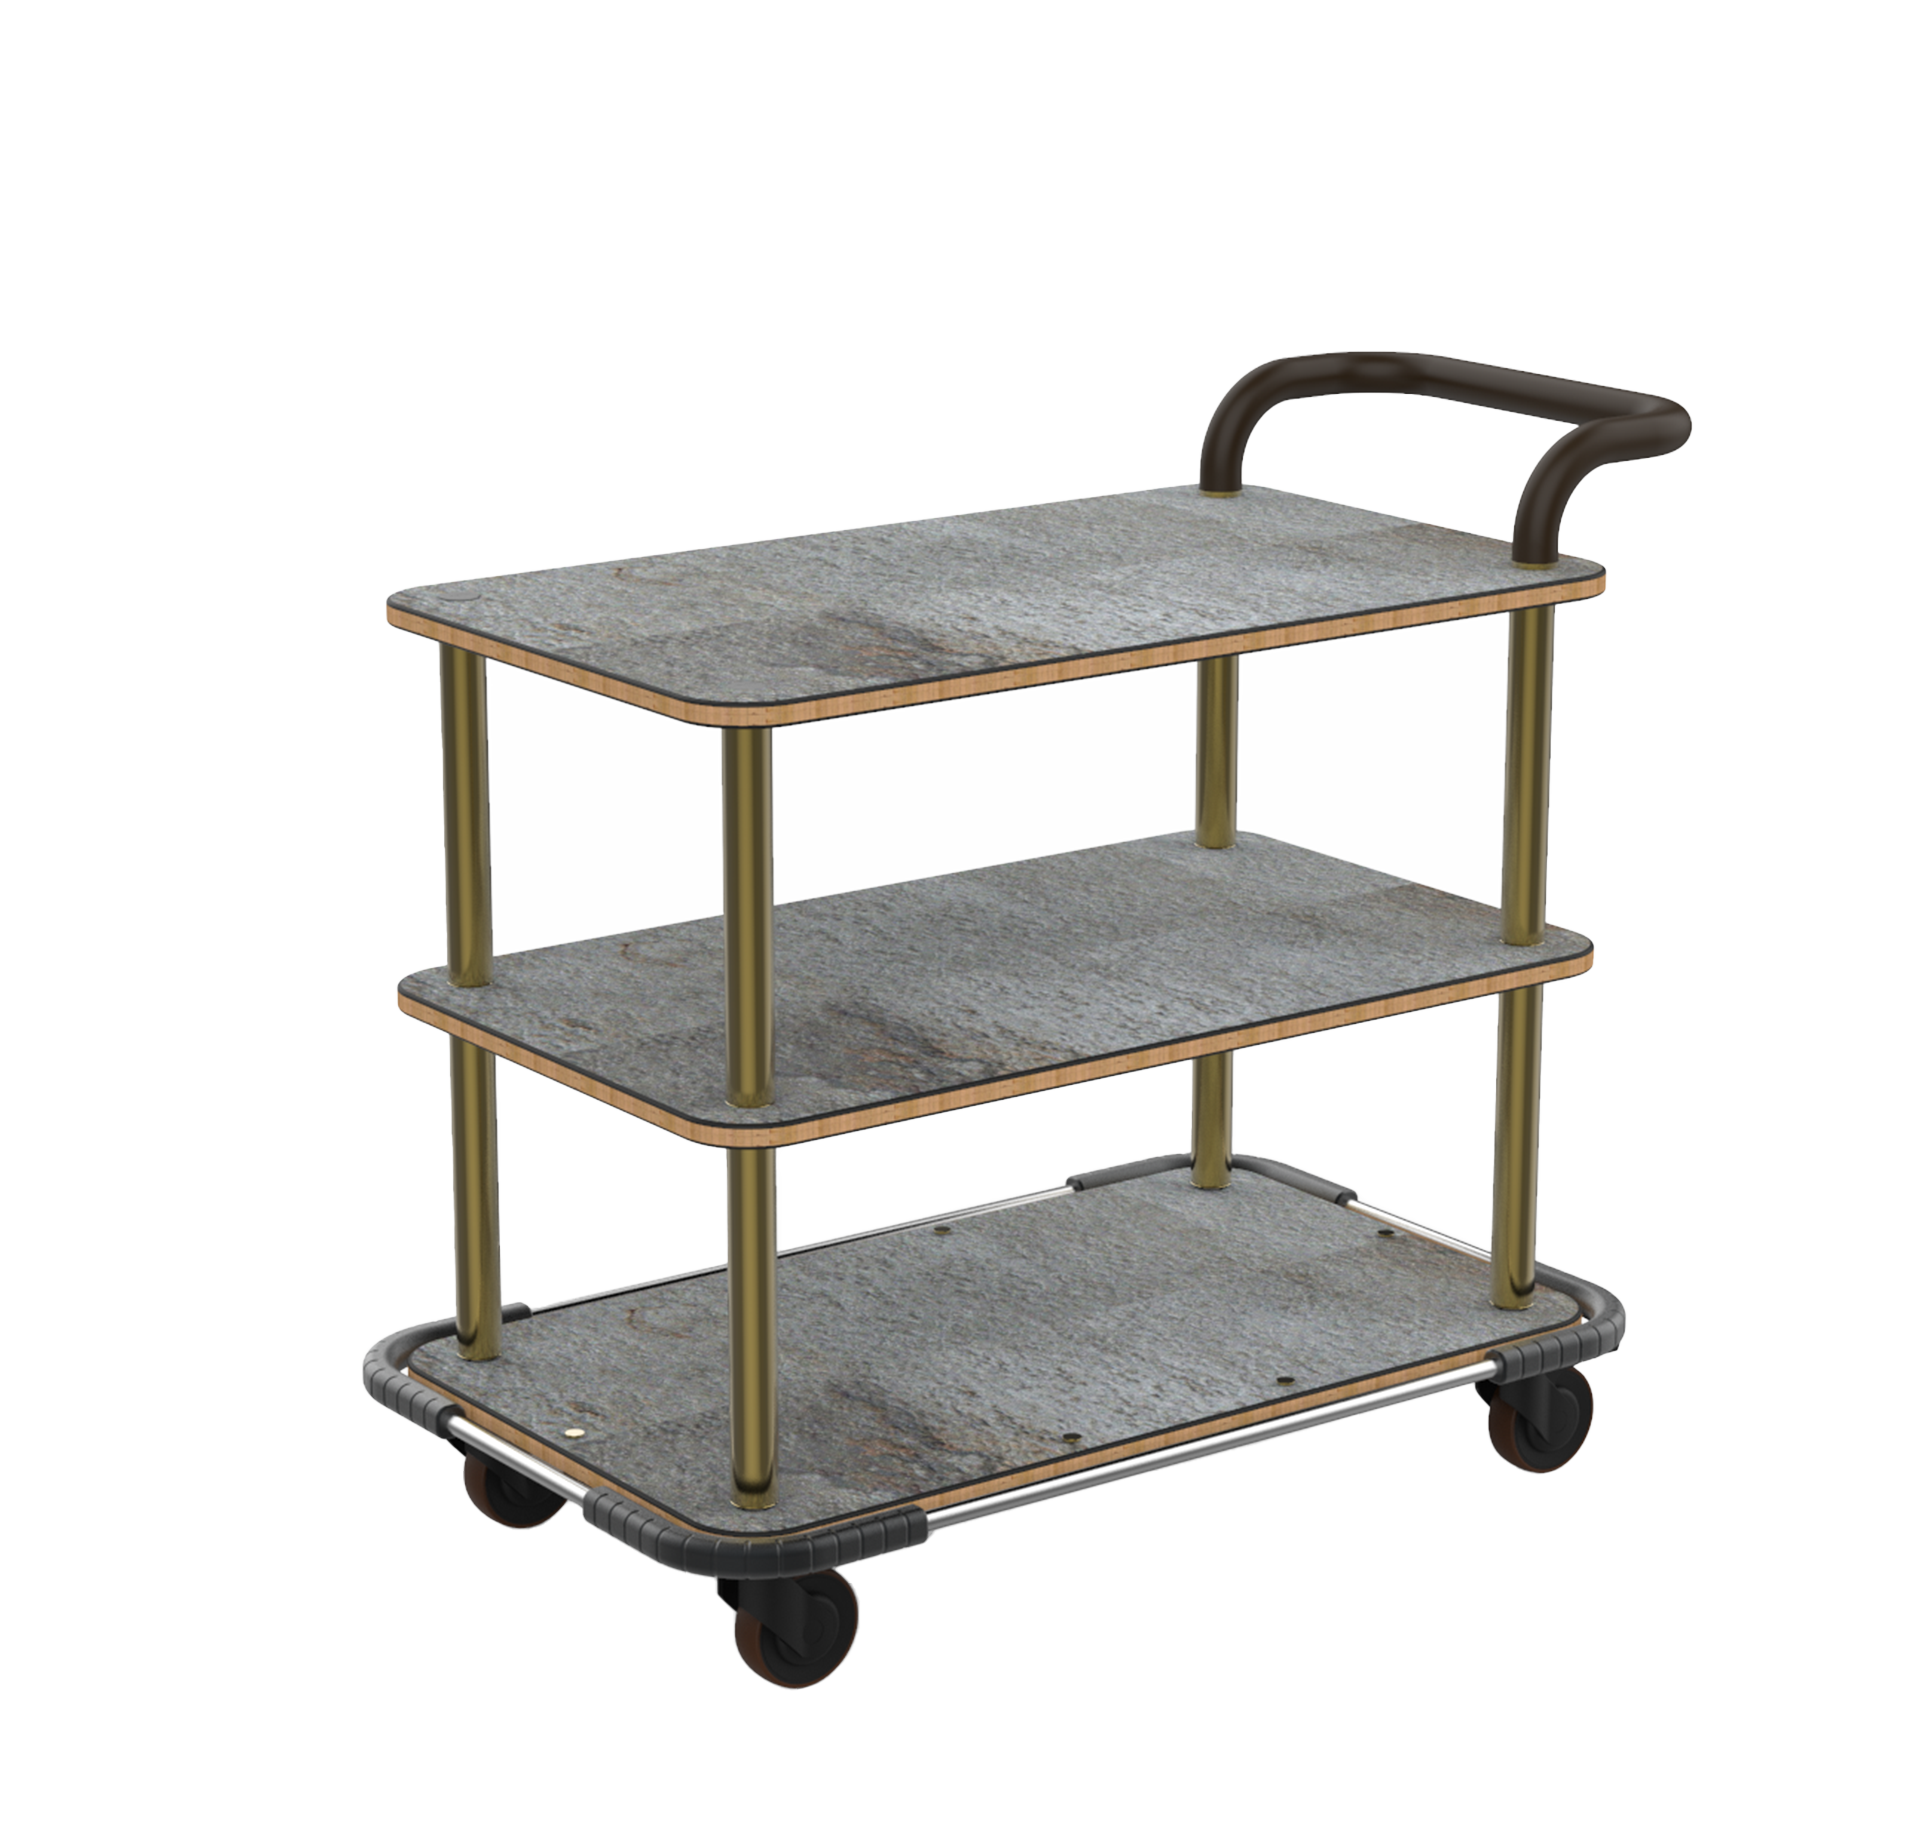 SERVICE CART WITH LEATHER HANDLE AND HEAVY DUTY BUMPER